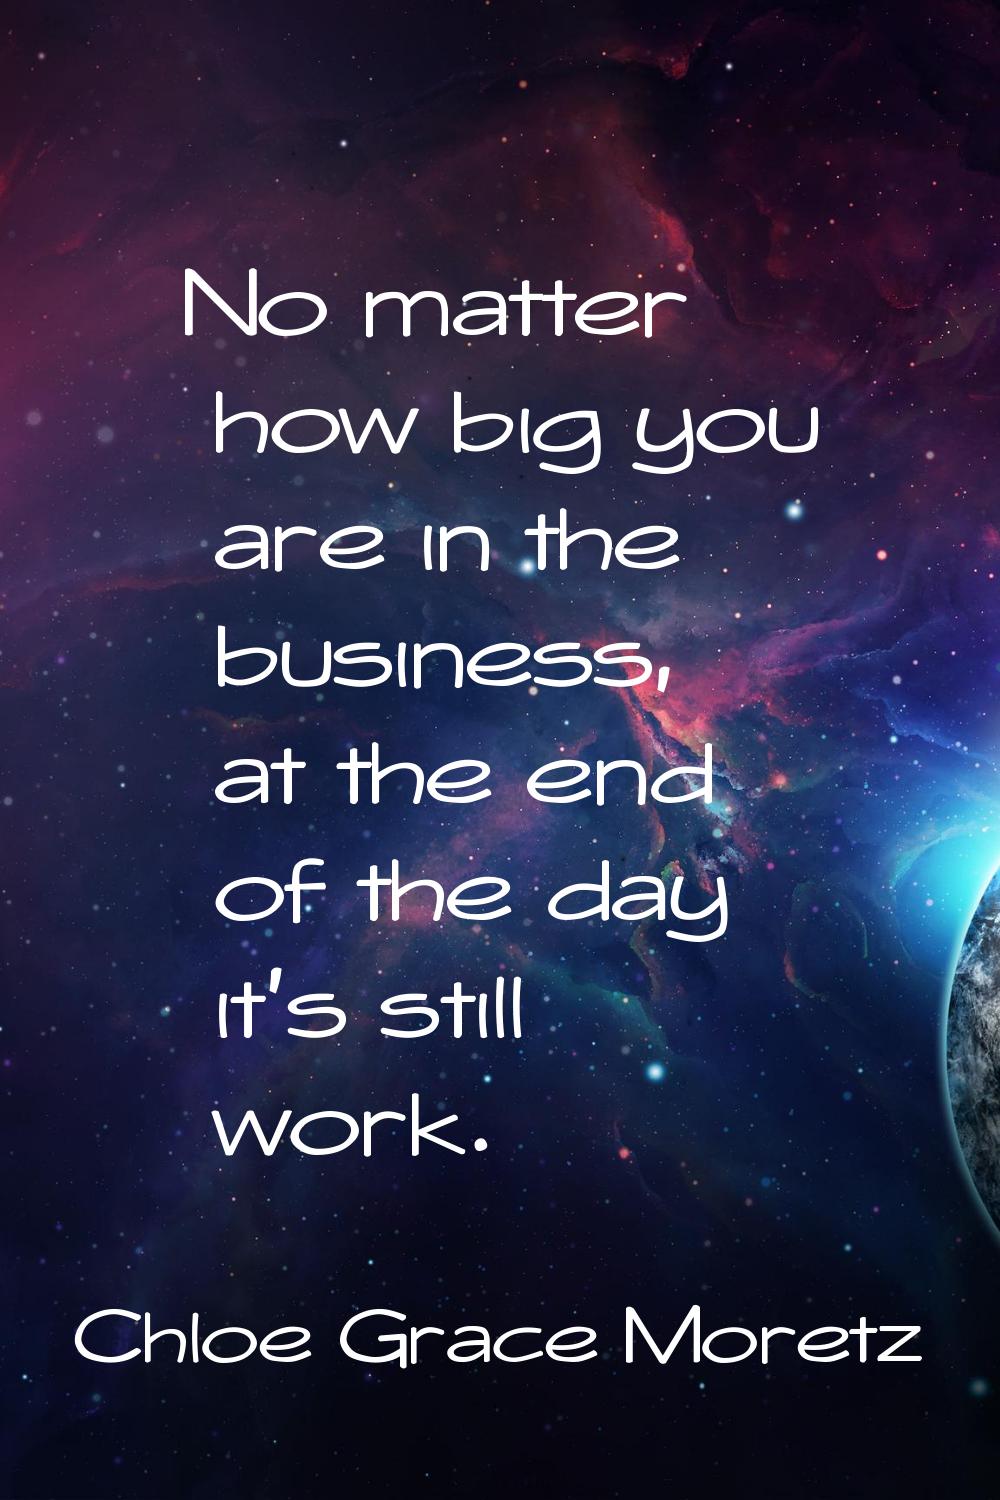 No matter how big you are in the business, at the end of the day it's still work.